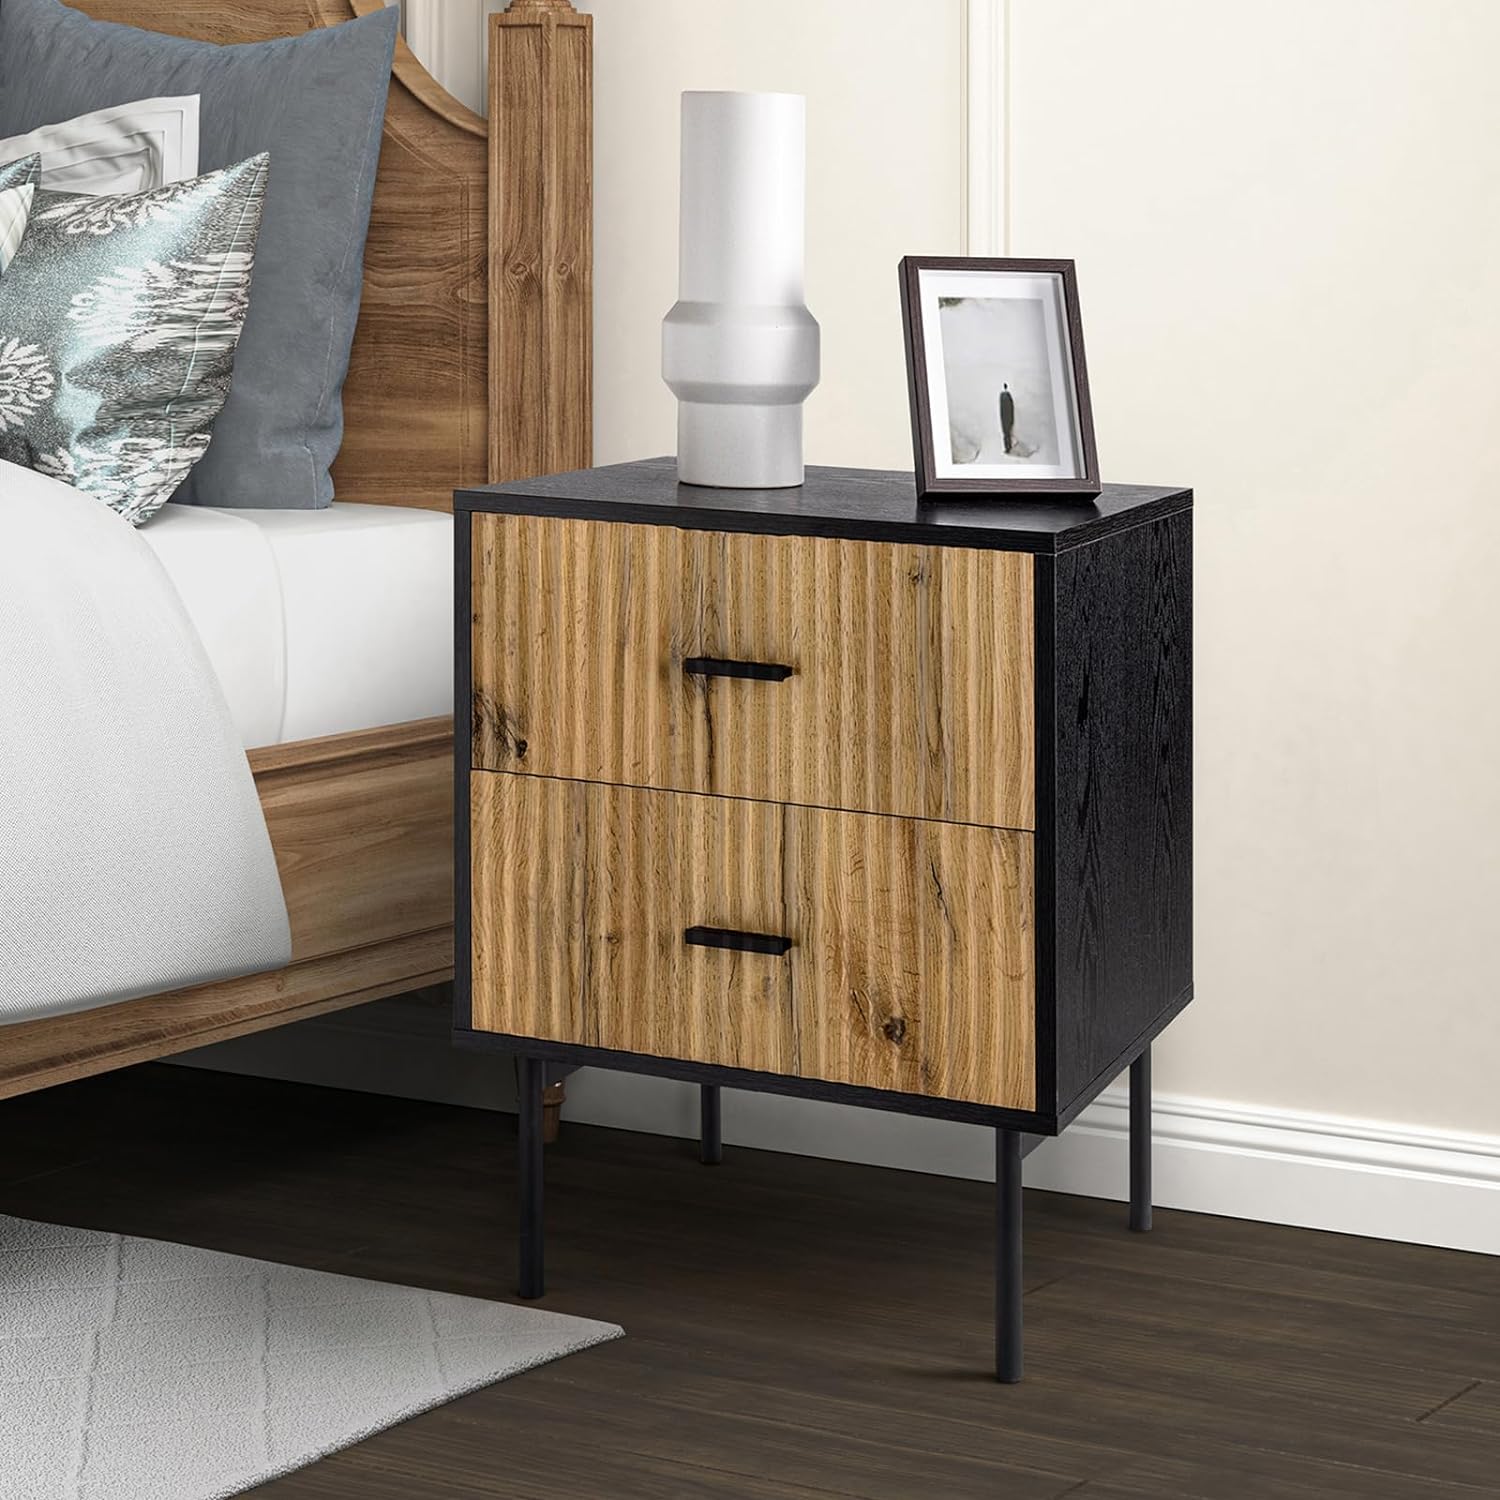 HULALA HOME Modern Nightstand with 2 Drawers, Wood Bedside Table, End Accent Table with Storage for Bedroom, Living Room, Metal Legs & Pull Handles, Black